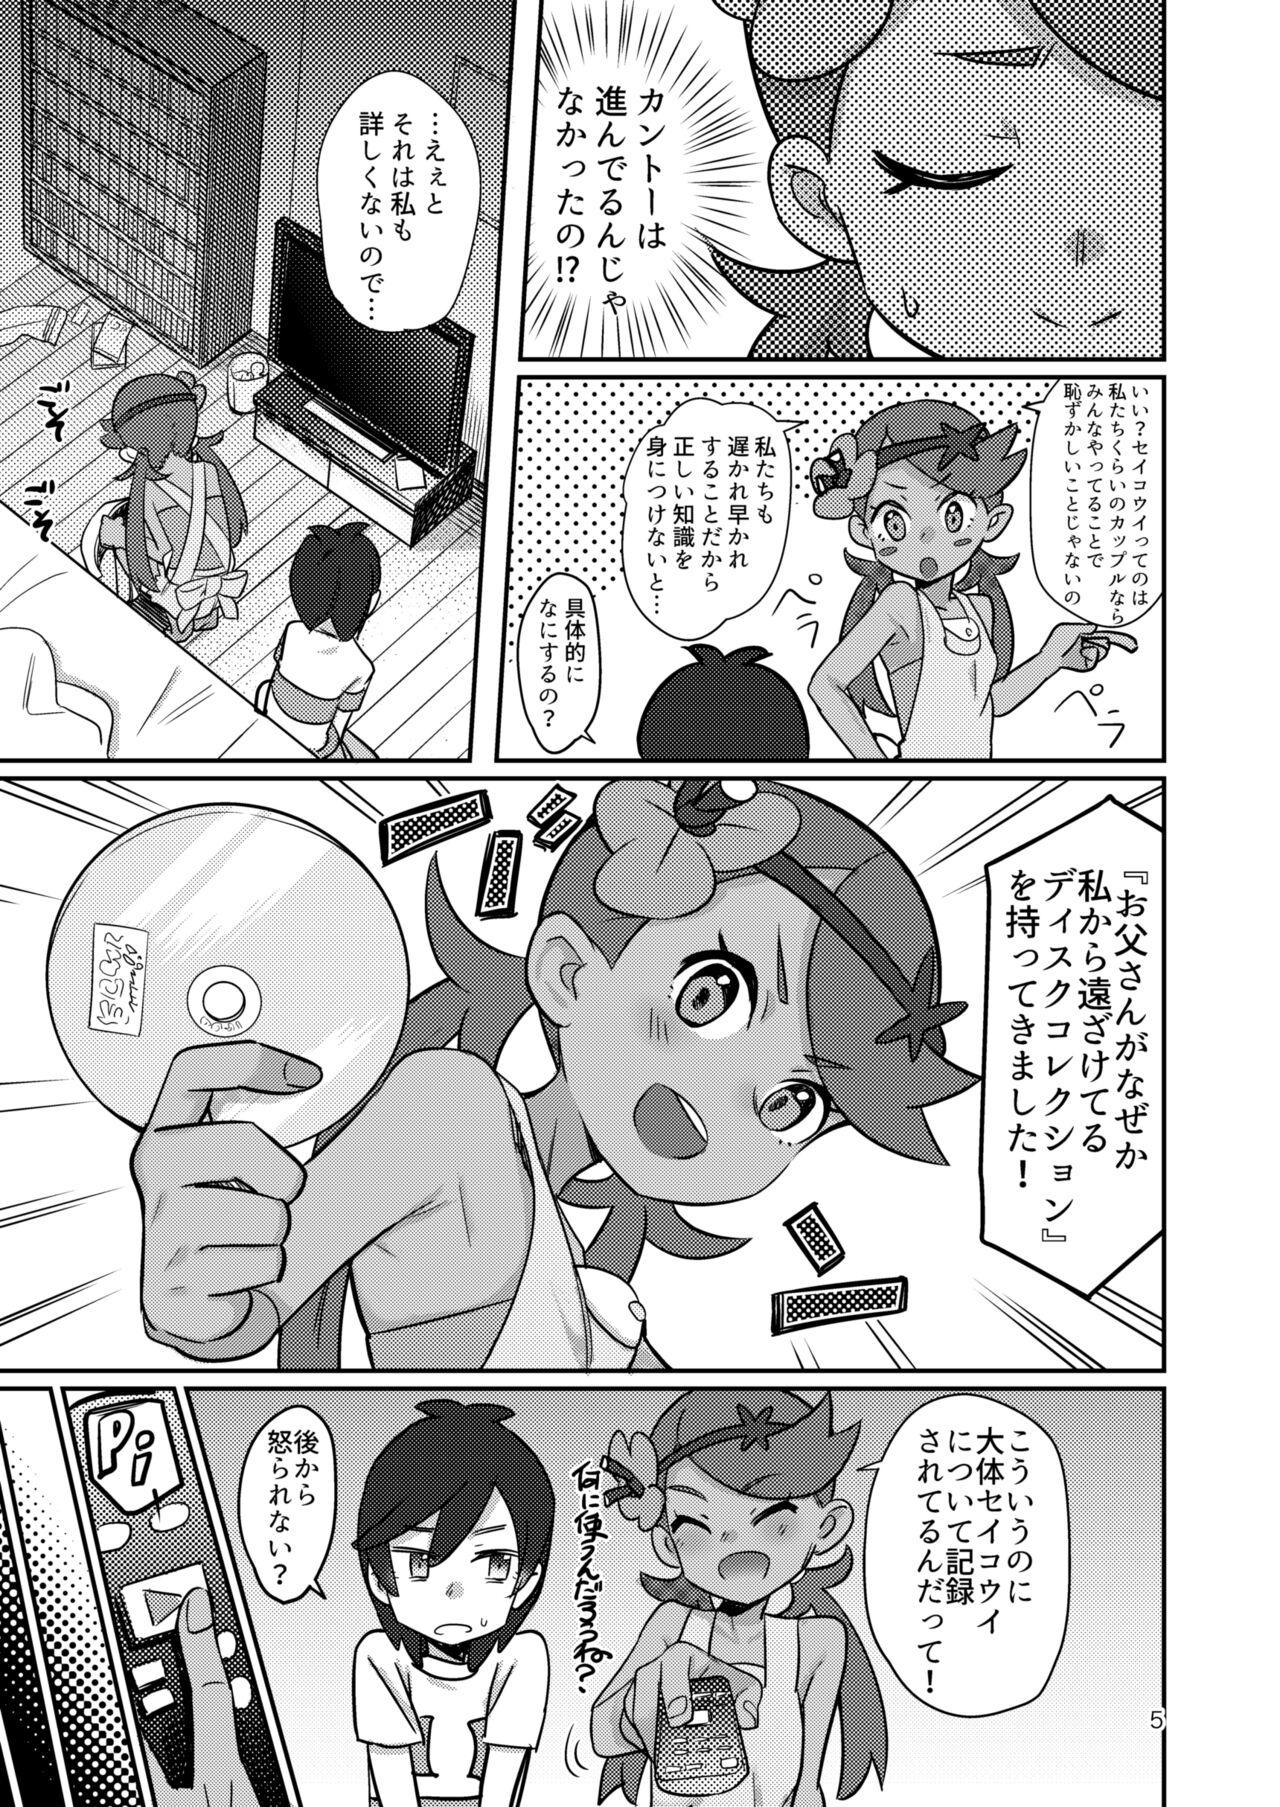 Lolicon ALOLA NIGHT - Pokemon | pocket monsters Missionary Porn - Page 4